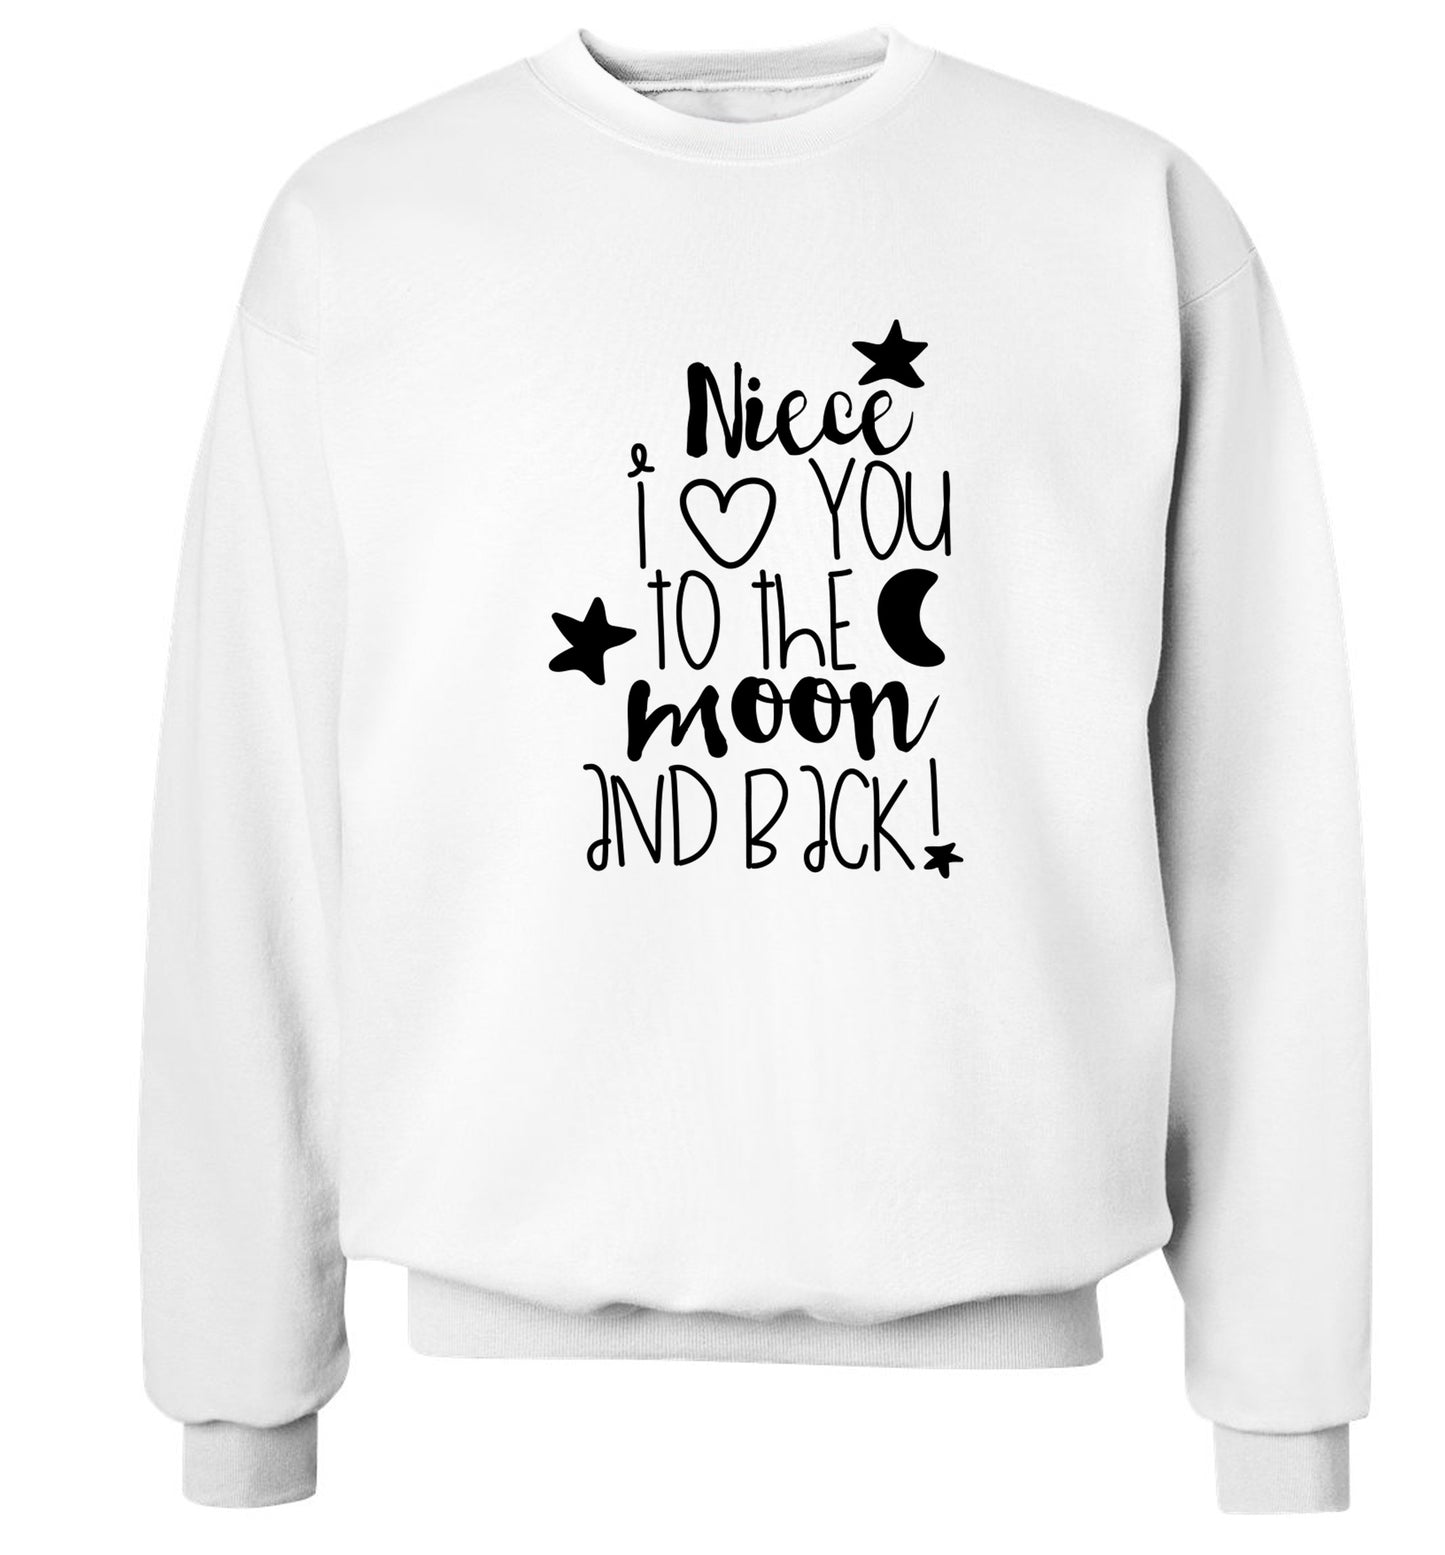 Niece I love you to the moon and back Adult's unisex white  sweater 2XL